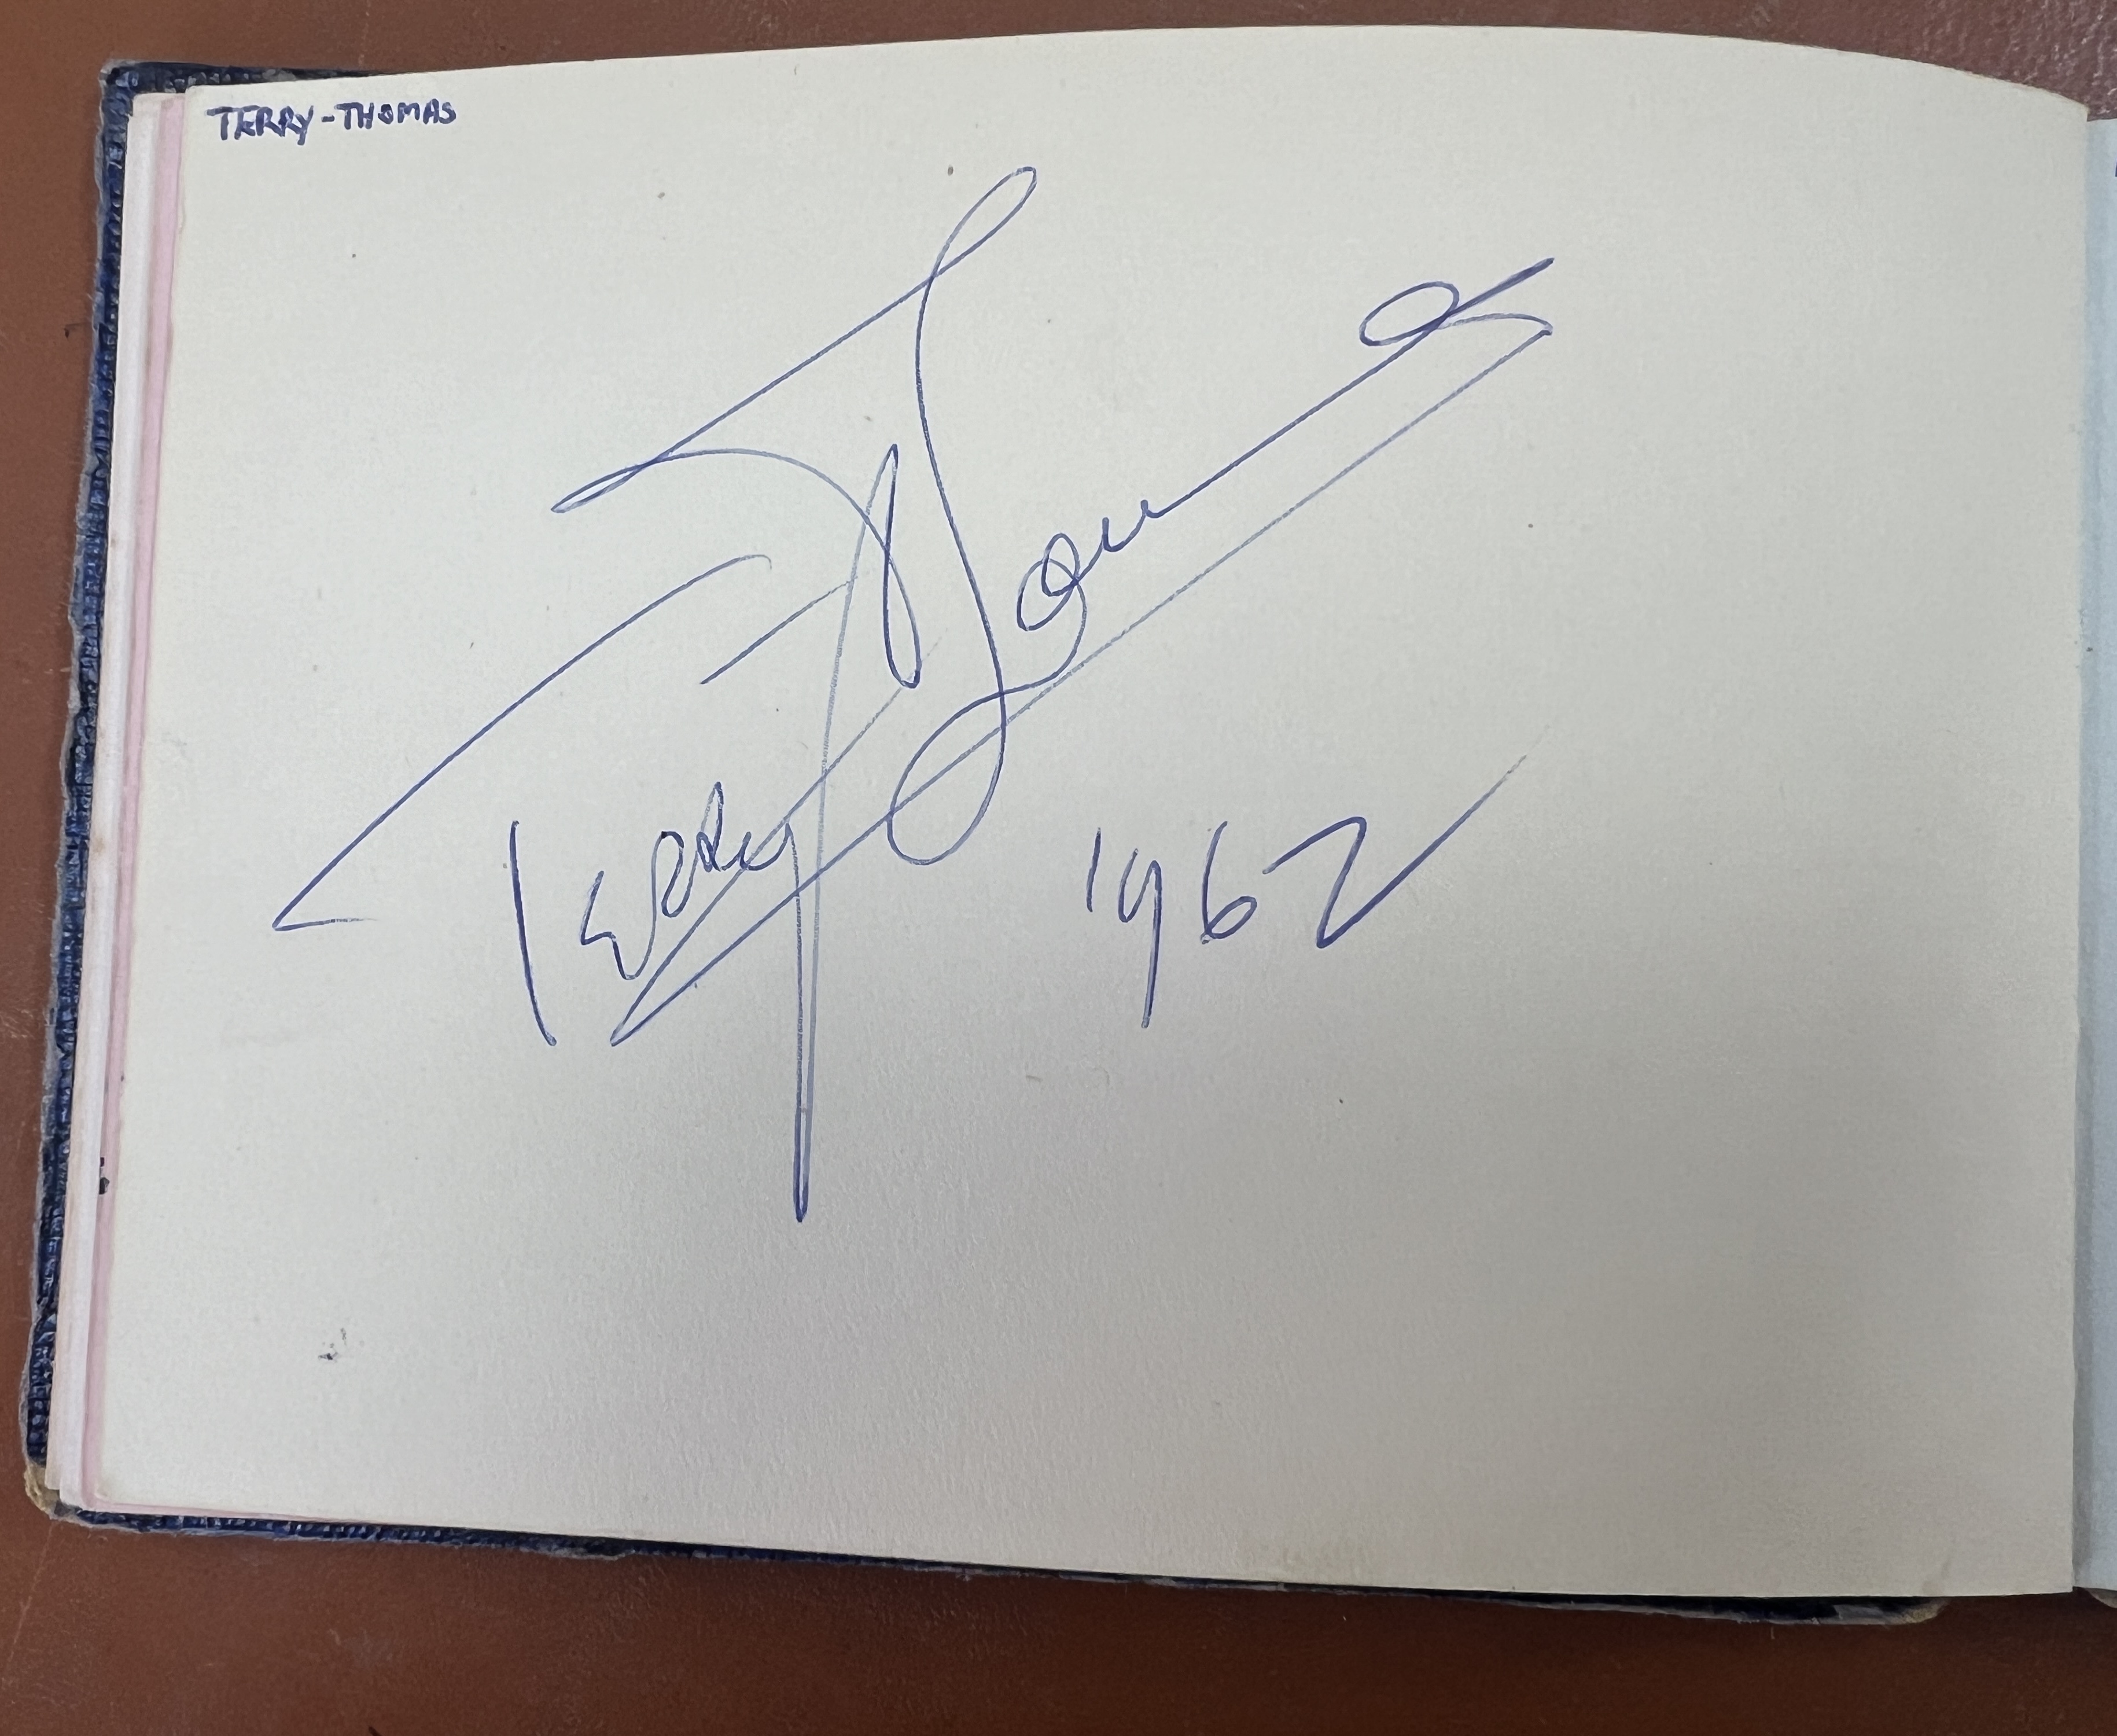 A 1960's autograph album containing autographs of various celebrities including Cliff Richard, - Image 26 of 37